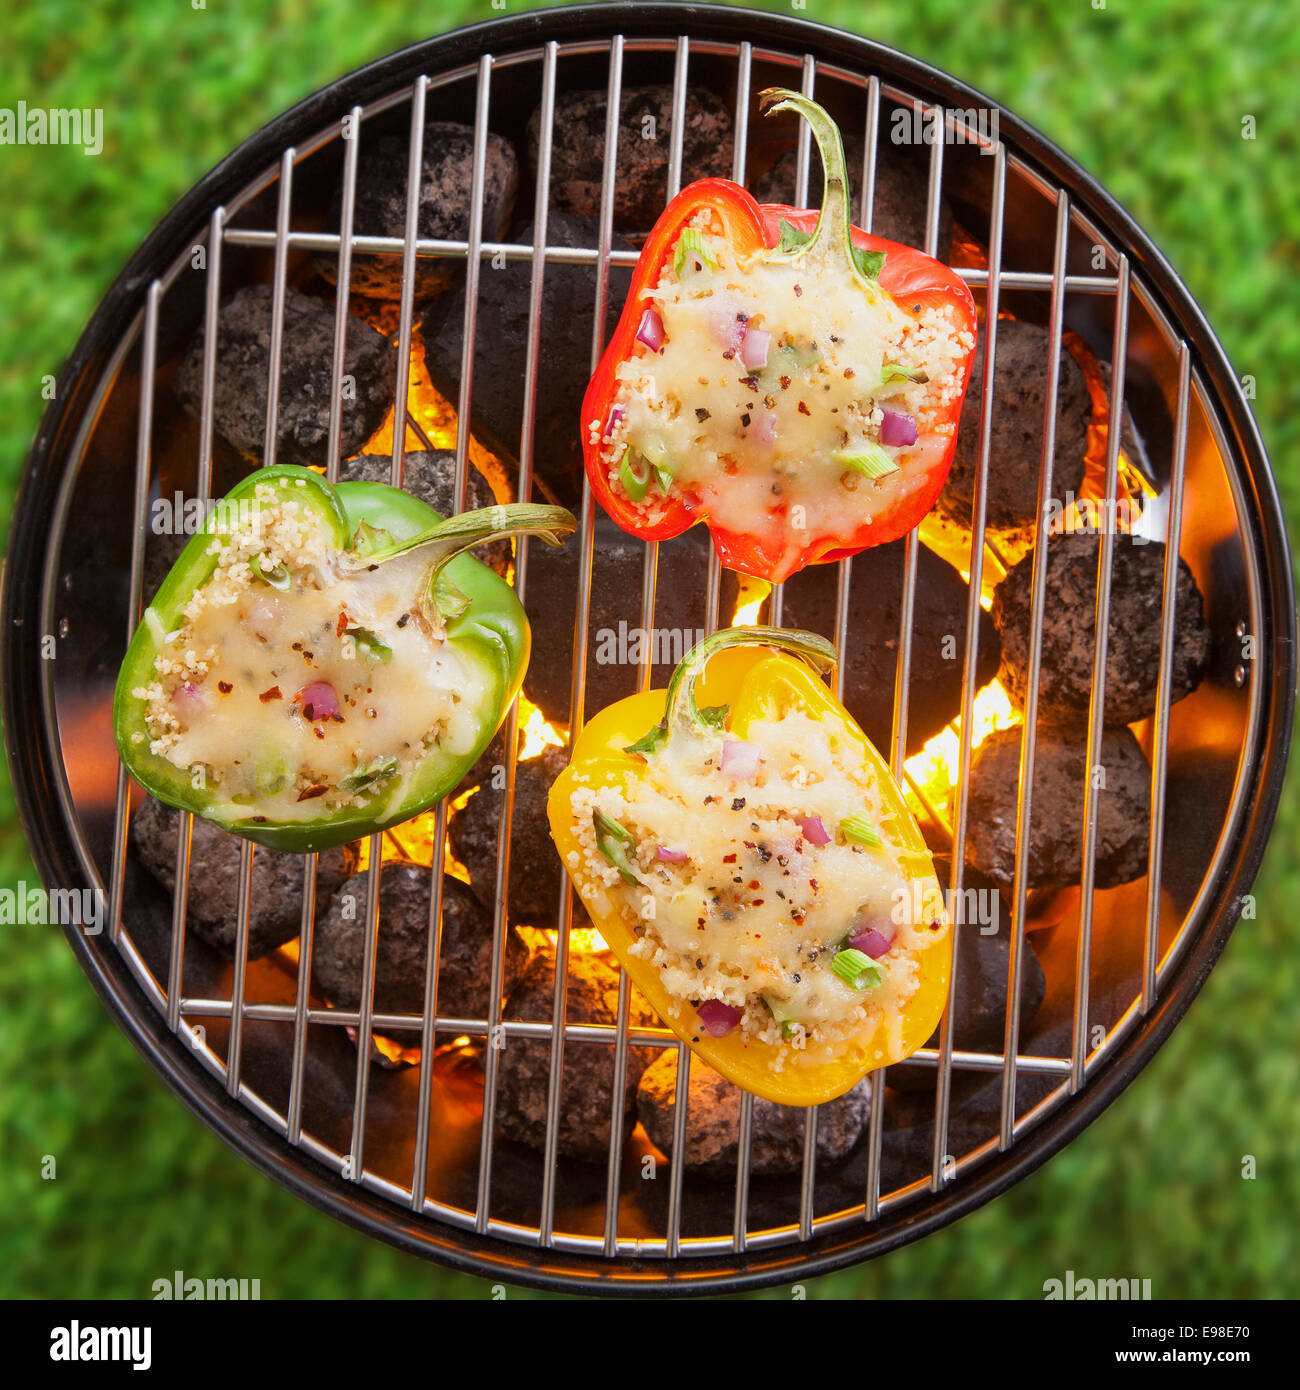 Overhead view on green grass of grilling stuffed savory bell peppers topped with melted cheese over the fire on an outdoor summer BBQ or picnic Stock Photo